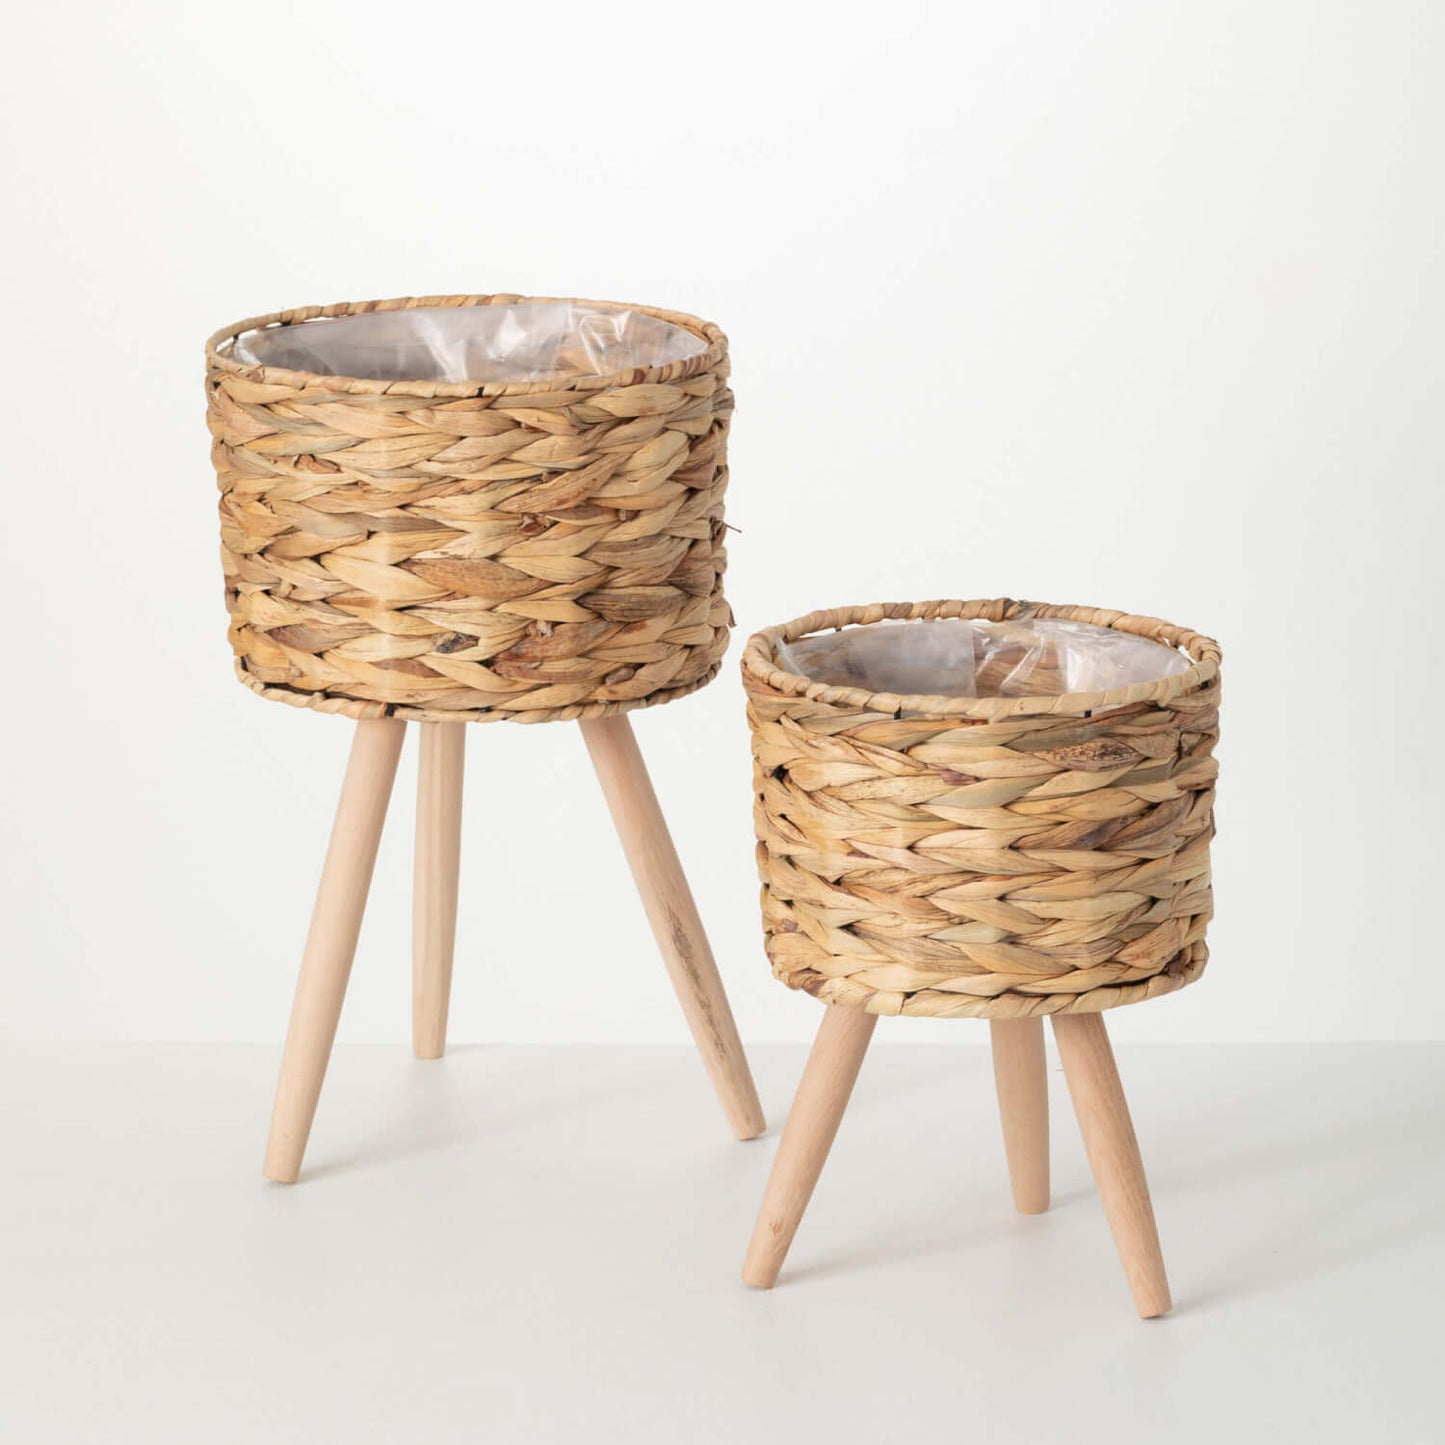 seagrass baskets with wooden legs on white background.